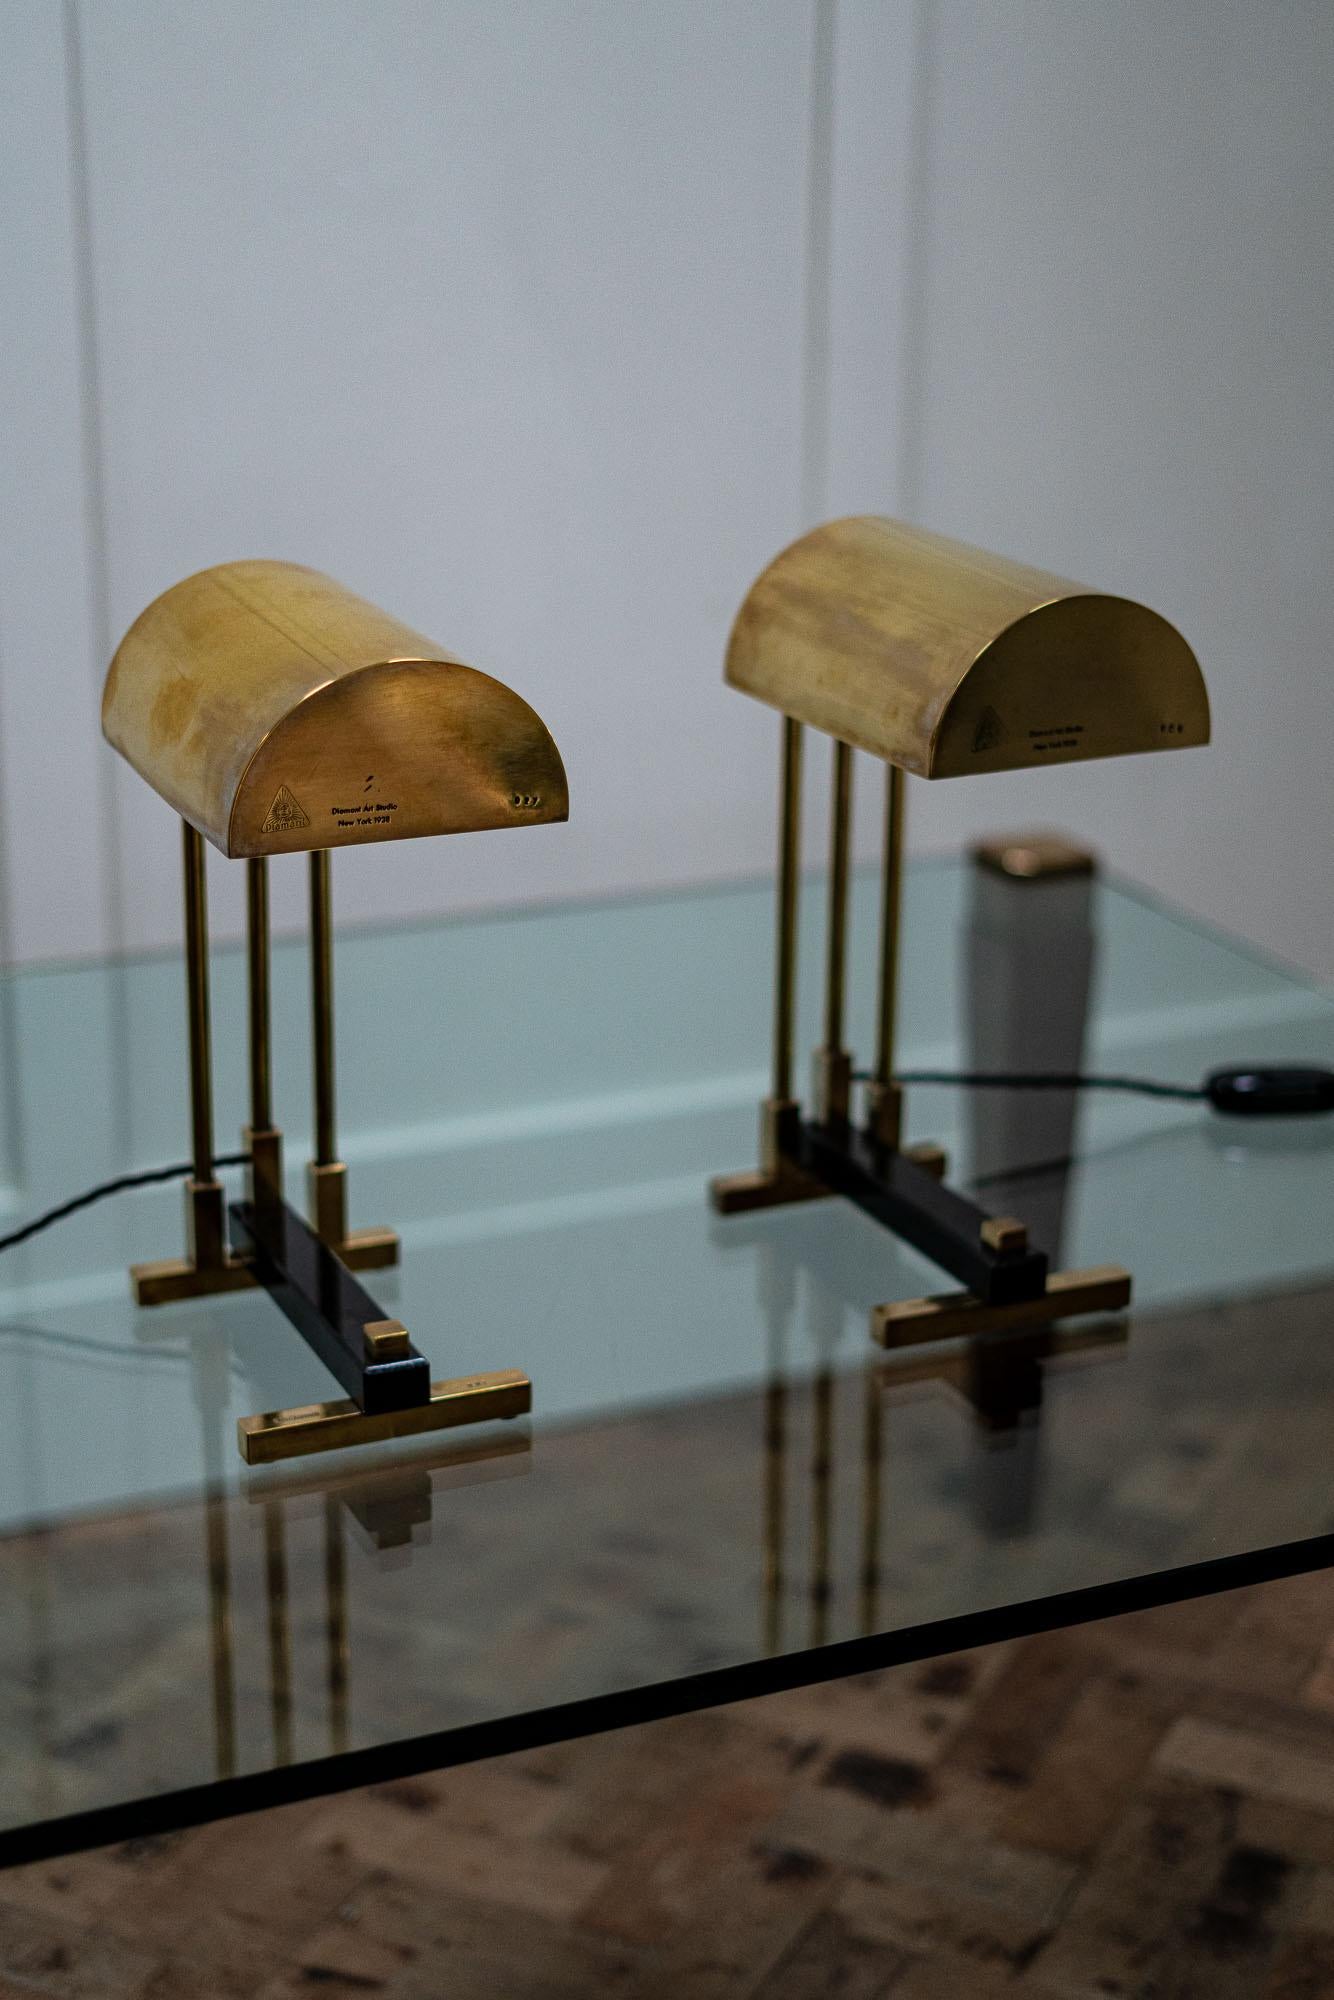 Pair of signed Elite Diamant lamps, made from nickel-plated brass.

They are signed 'Elite Diamant', a German manufacturer who made a limited productions inspired by 